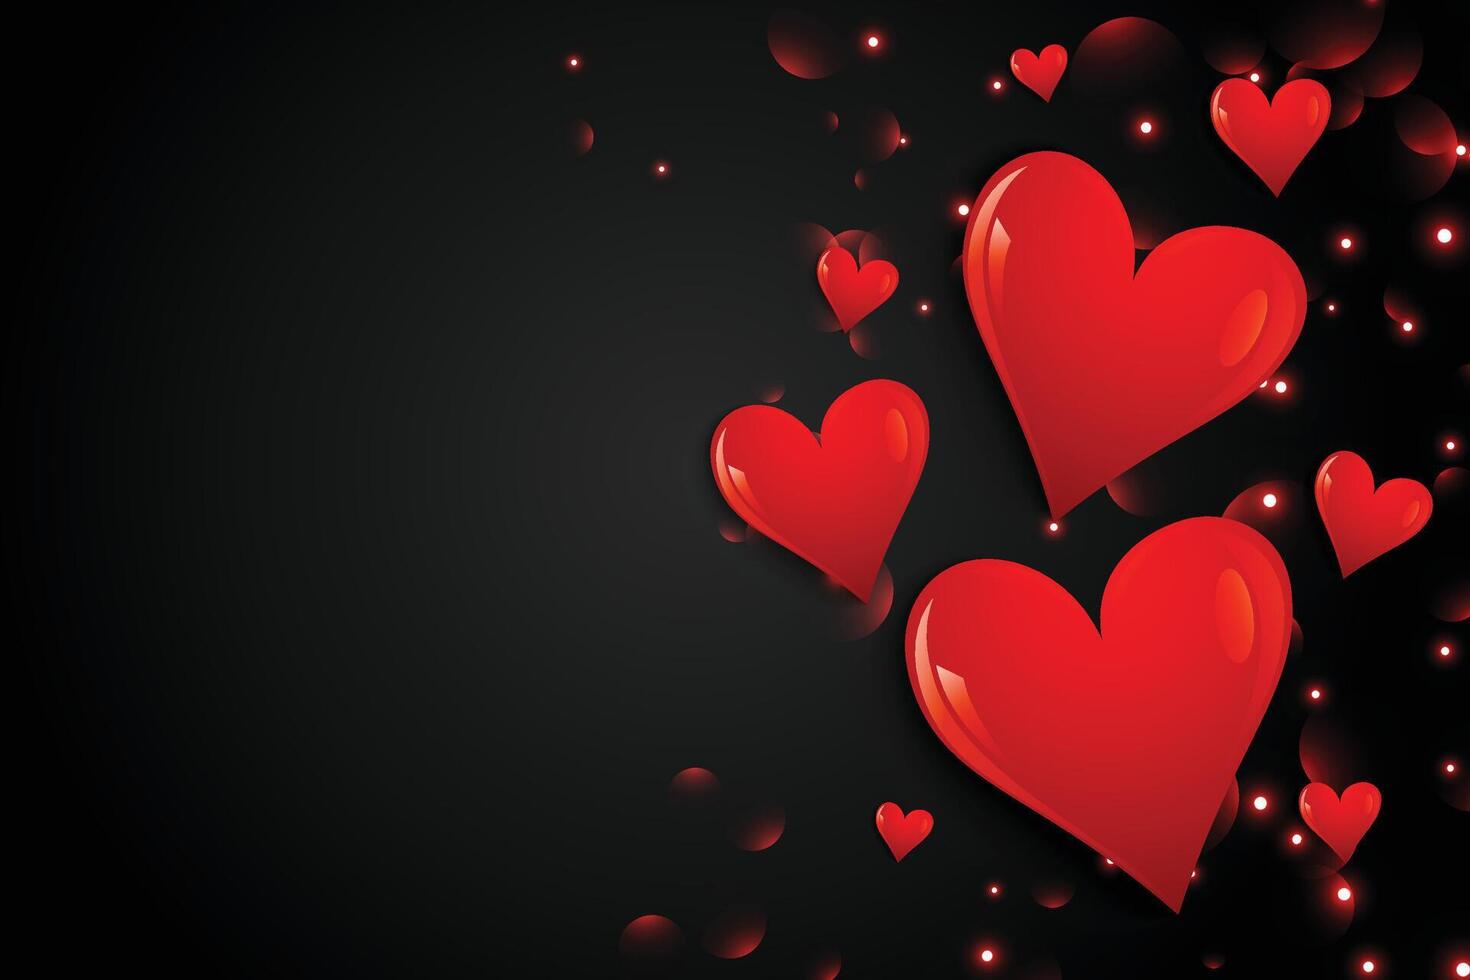 black background with hand drawn hearts vector